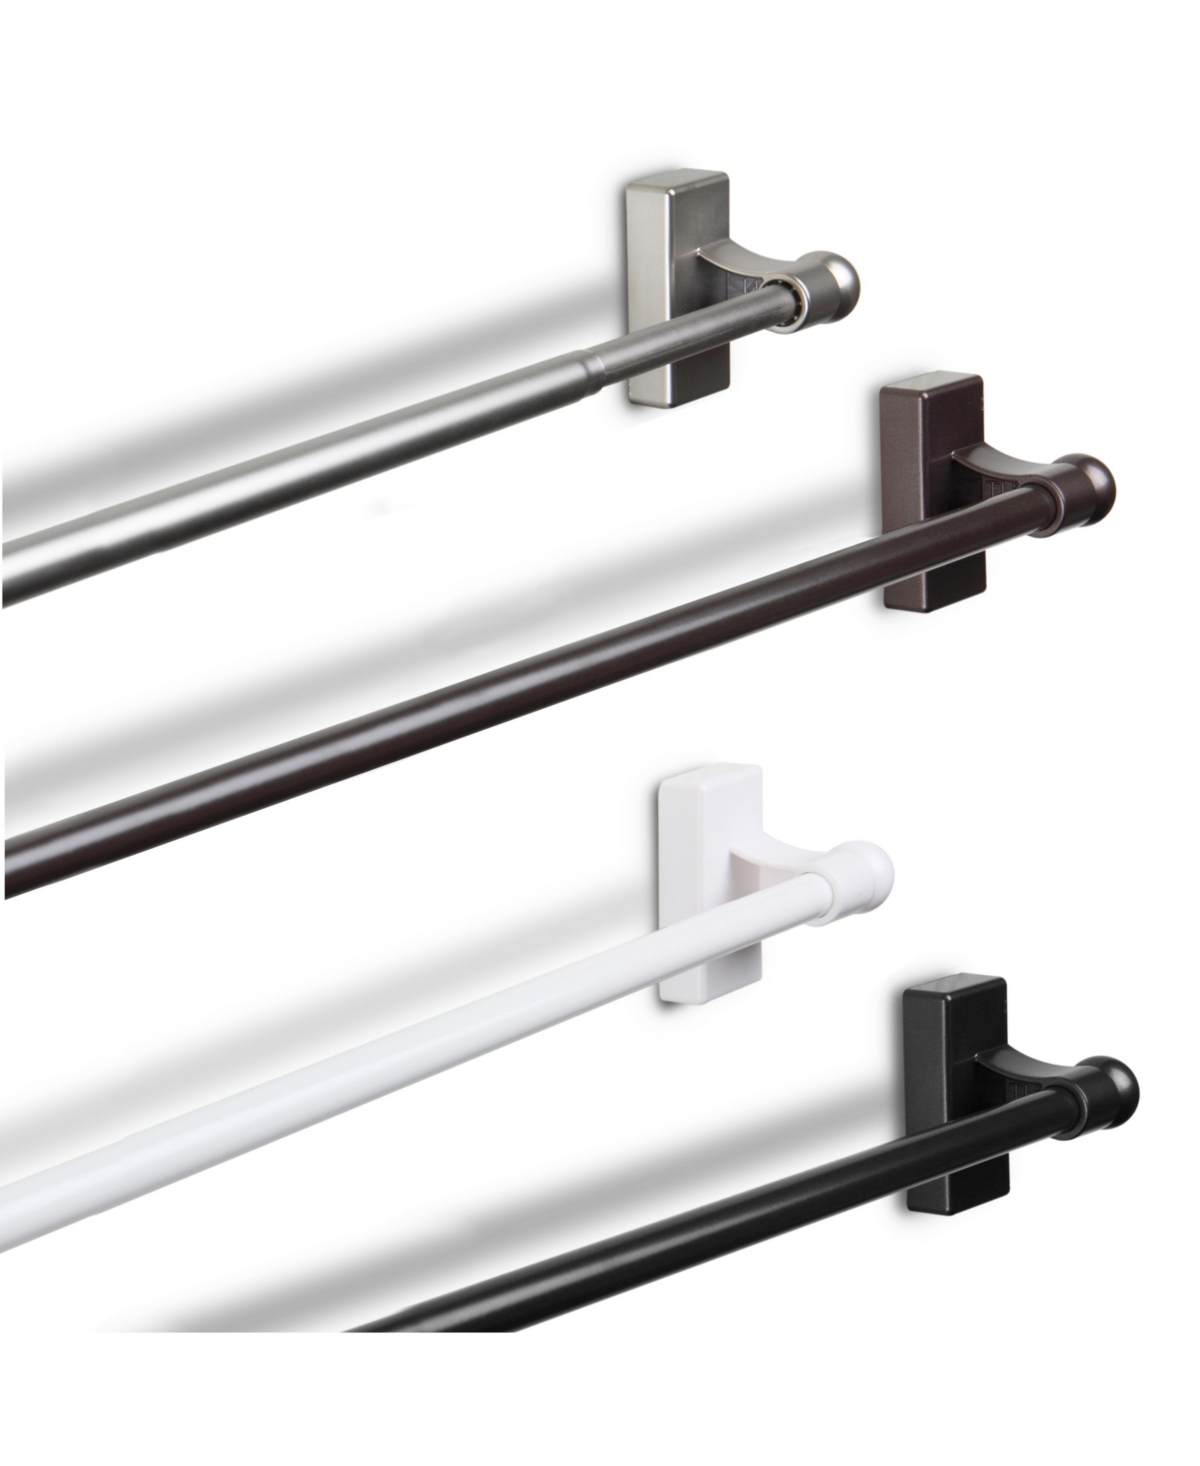 7/16" Magnetic Rod 48-84 Inches - Satin nickel